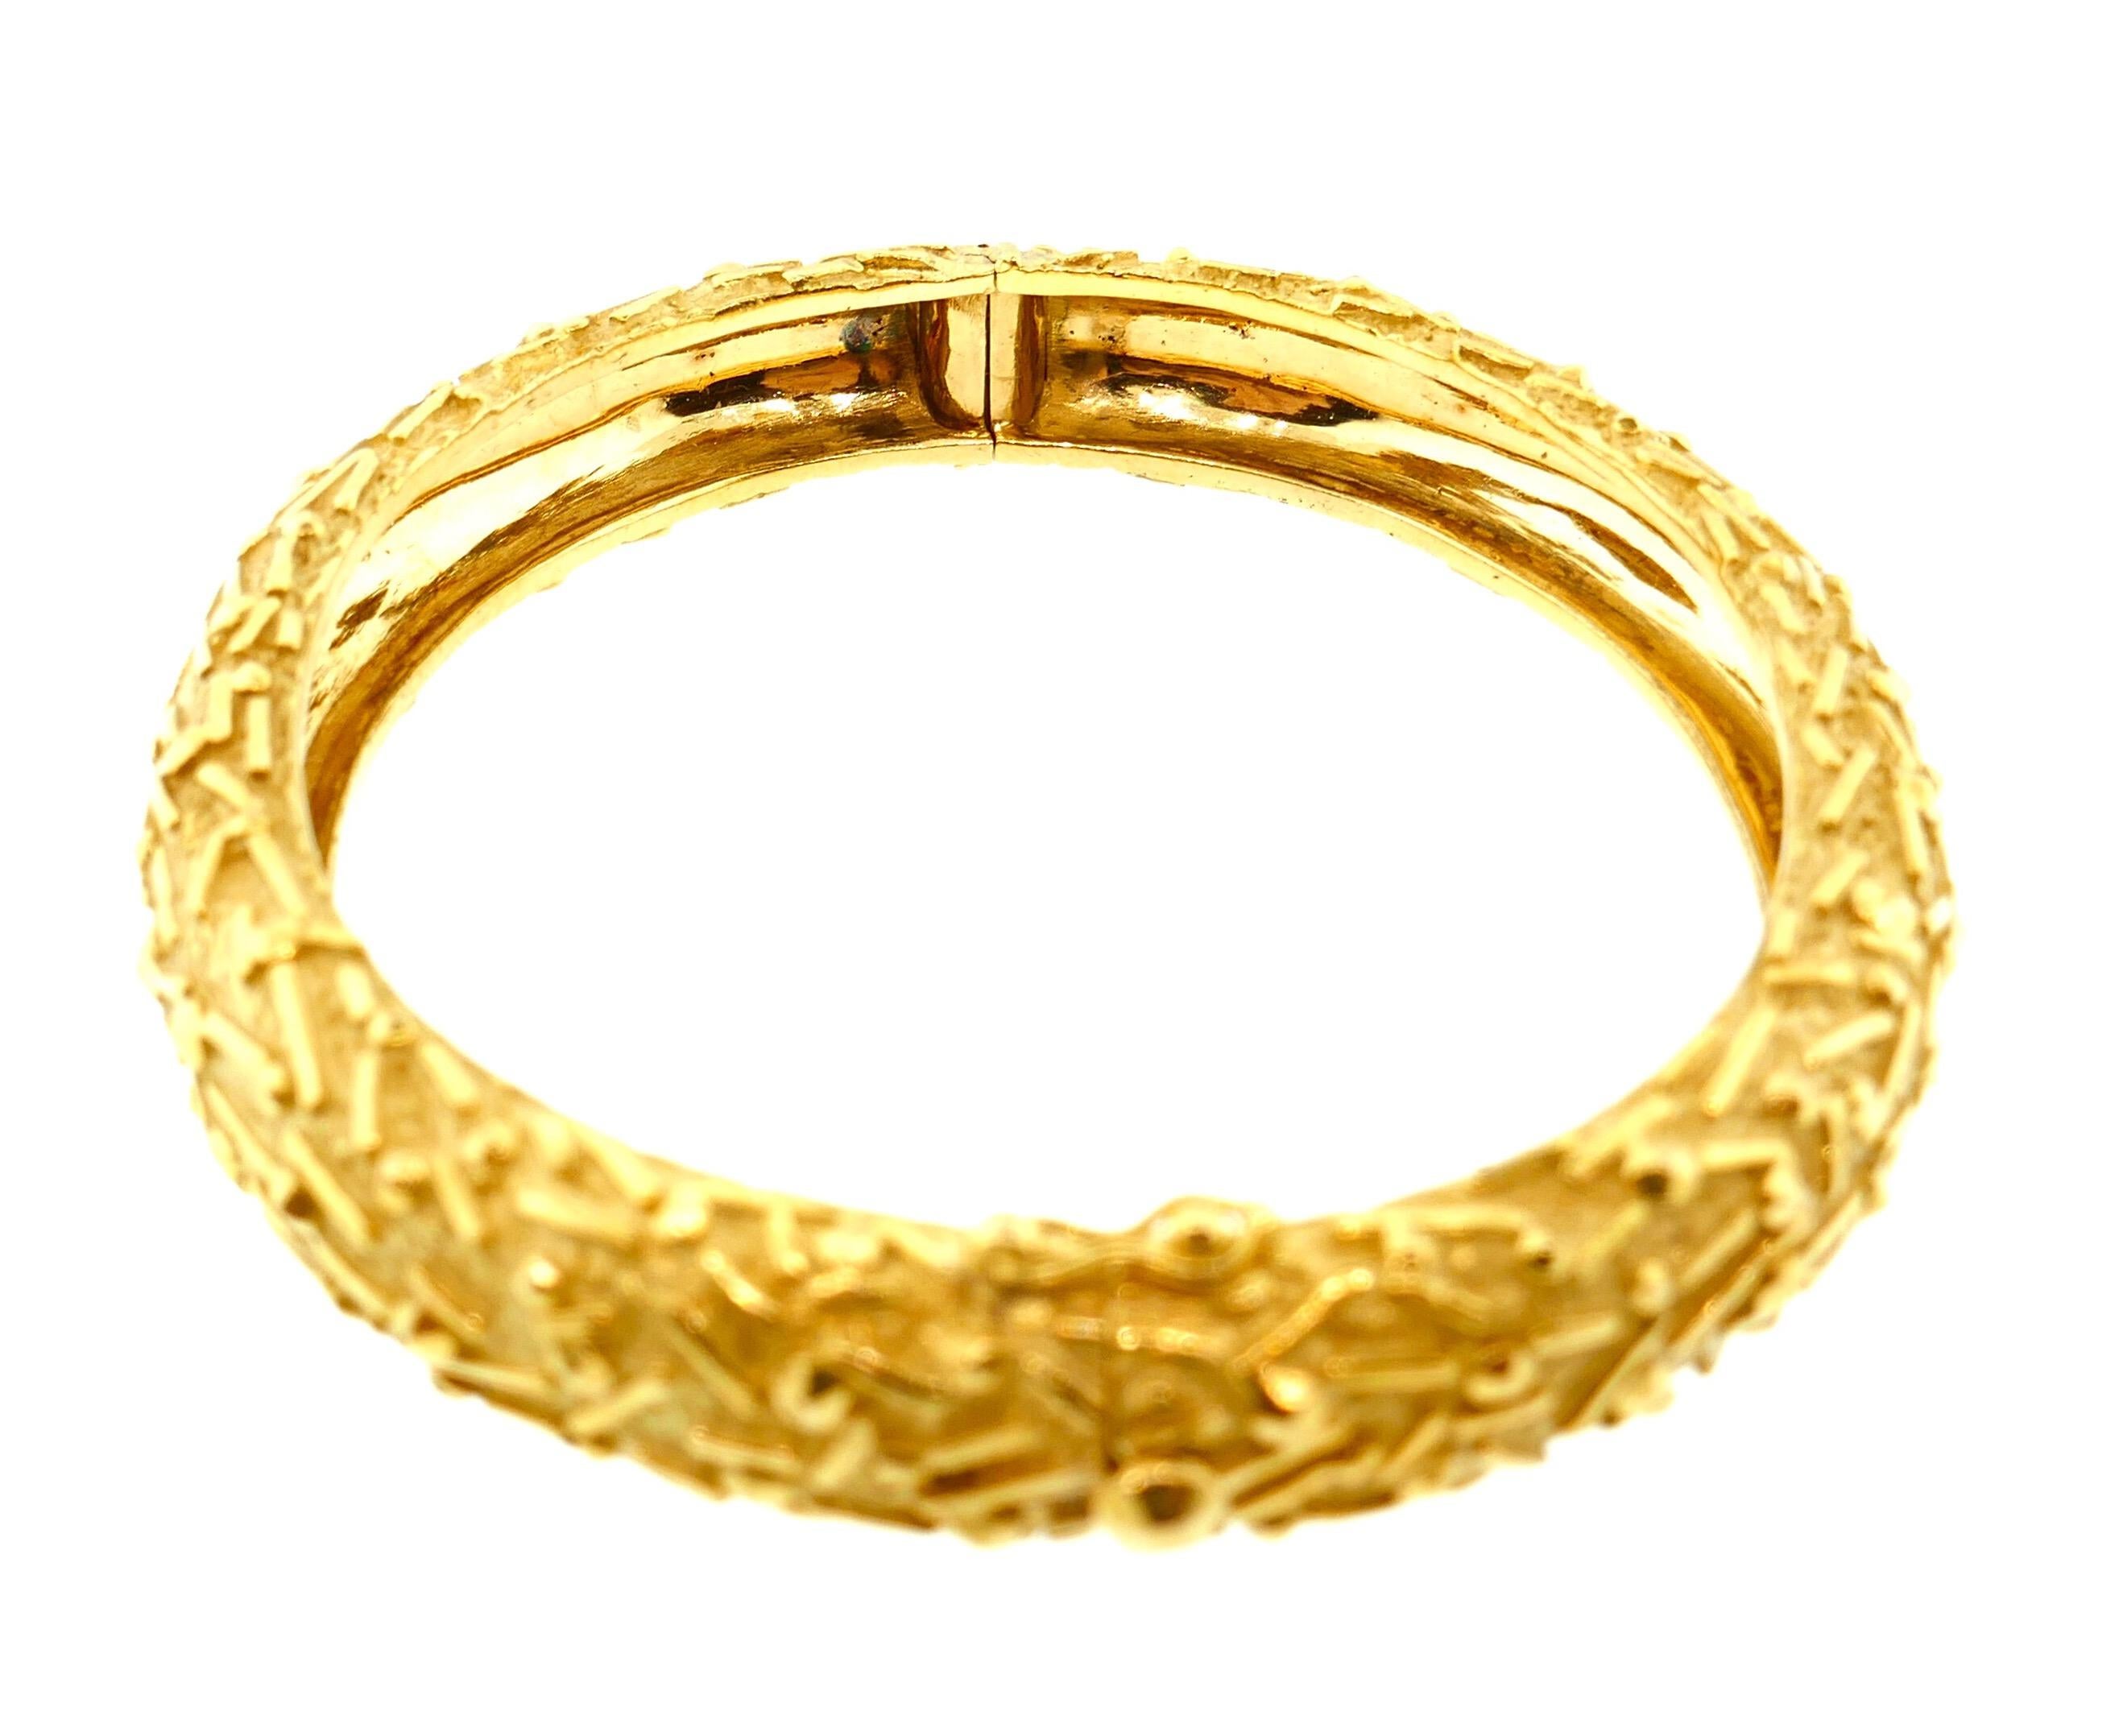 Tiffany & Co. Italy 18 Karat Yellow Gold Modernist Bangle

This Tiffany & Co. bangle features an intricate modernist design in amazing detail. 

Weight: 51 Grams 

Size: Will Comfortably Fit a 6.25